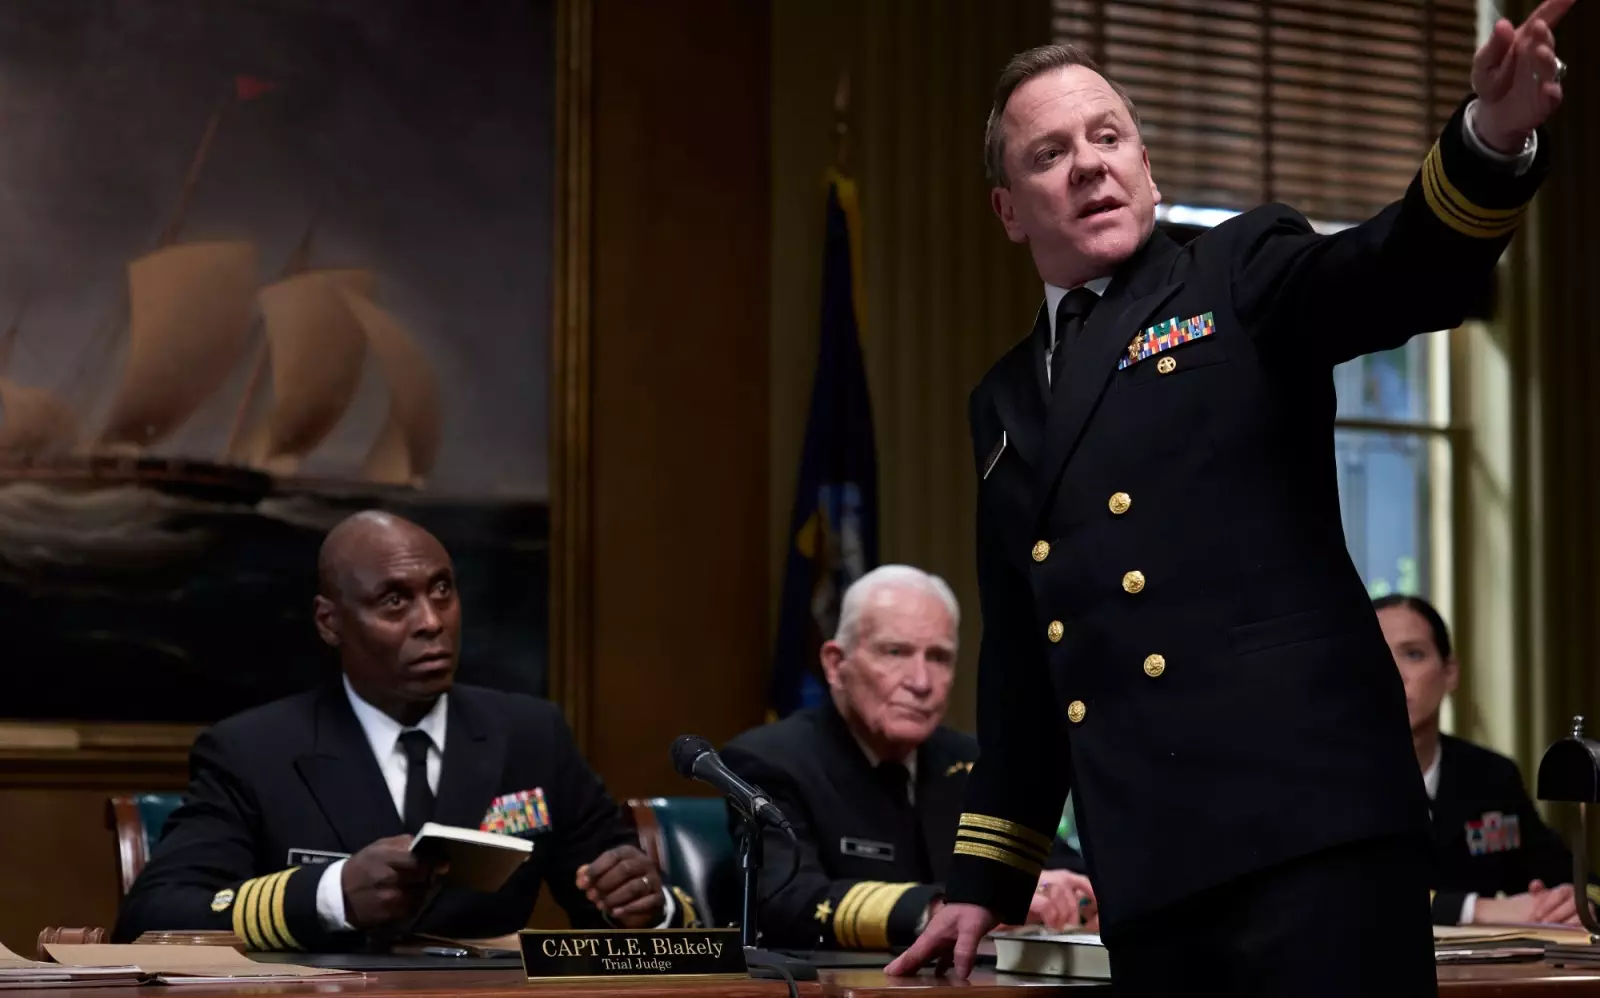 William Friedkin's The Caine Mutiny Court-Martial unveils trailer and poster